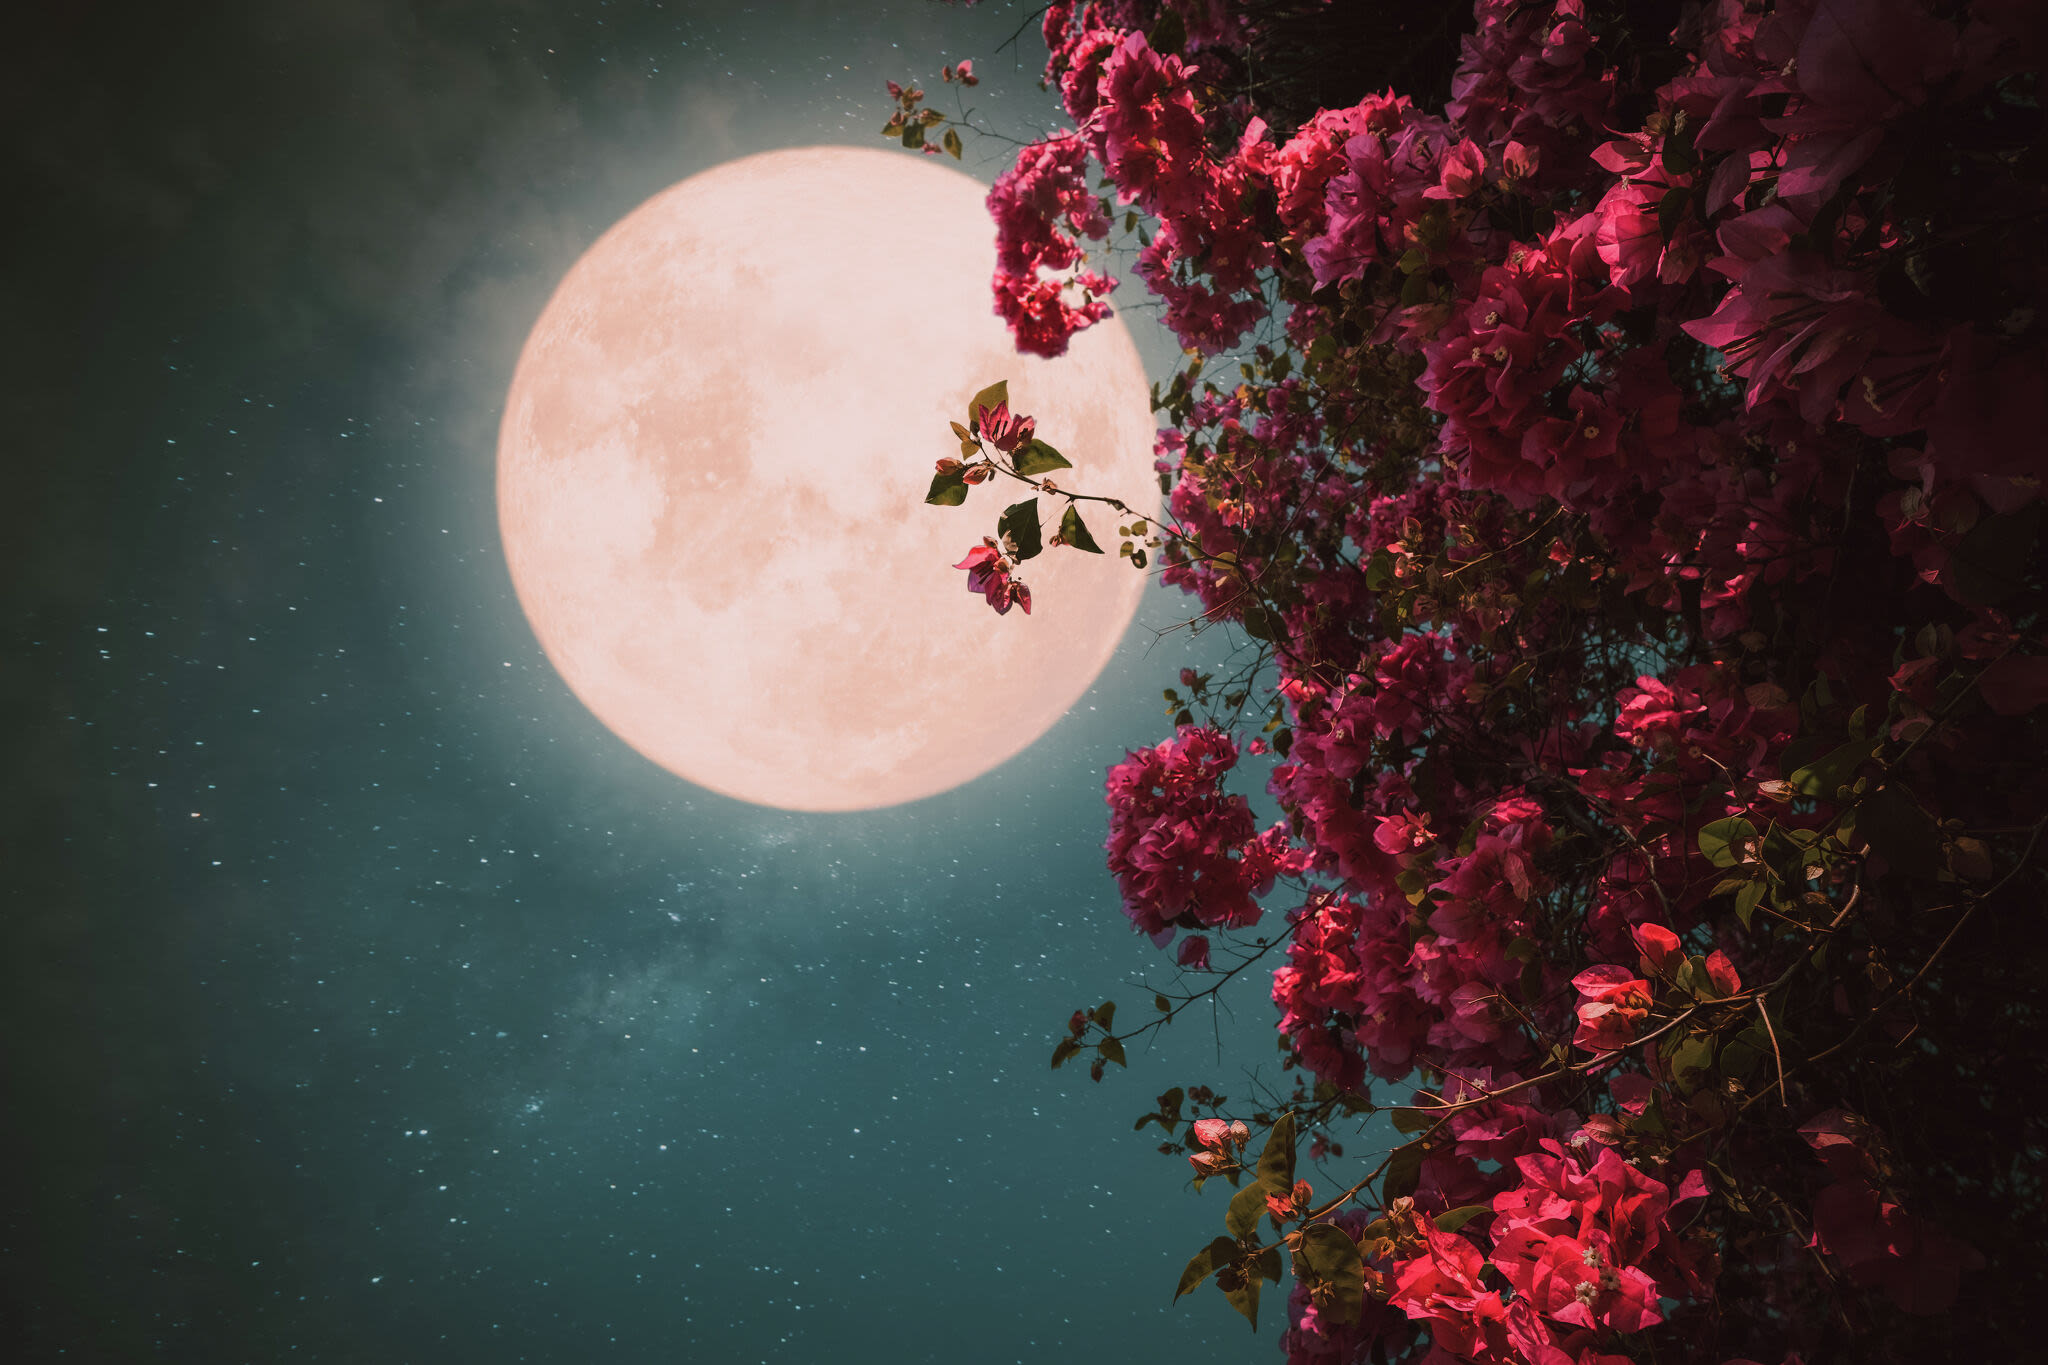 May's 'flower moon' to peak this week in full illumination